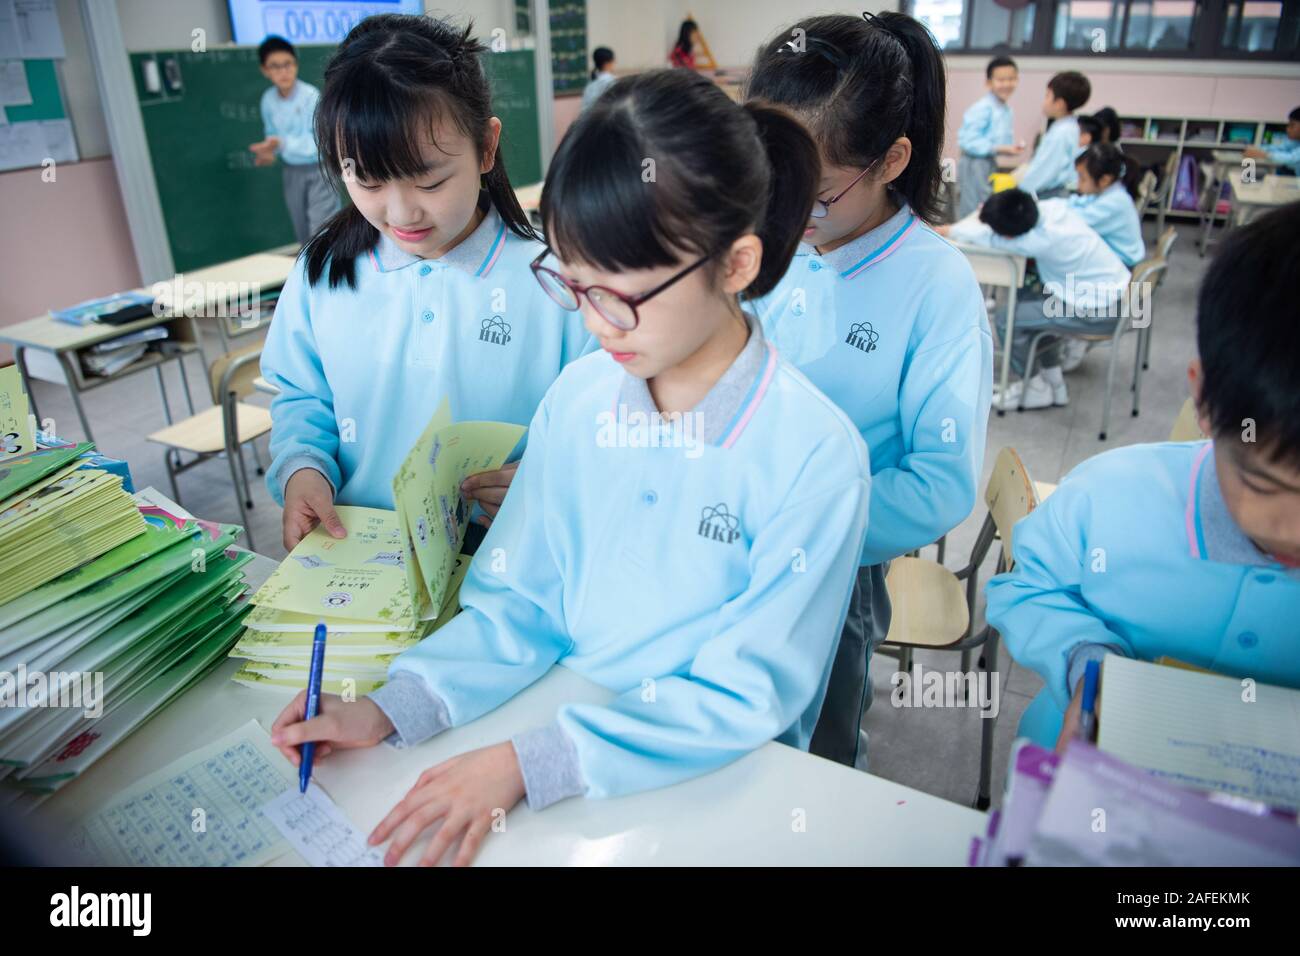 (191215) -- MACAO, Dec. 15, 2019 (Xinhua) -- Yu In Sin (1st L, front) and her schoolmates arrange the exercise books at the classroom of the Premier School Affiliated to Hou Kong Middle School in Macao, south China, Nov. 25, 2019. The 10-year-old Yu, born in Macao, is a fifth-grade student of the Premier School Affiliated to Hou Kong Middle School. Her brother also studies at the school.    In the eyes of her mother, Yu In Sin is an optimistic, sunny and lively girl with many talents. She has won many awards in Macao primary school students' storytelling, recitation, art and dance competitions Stock Photo